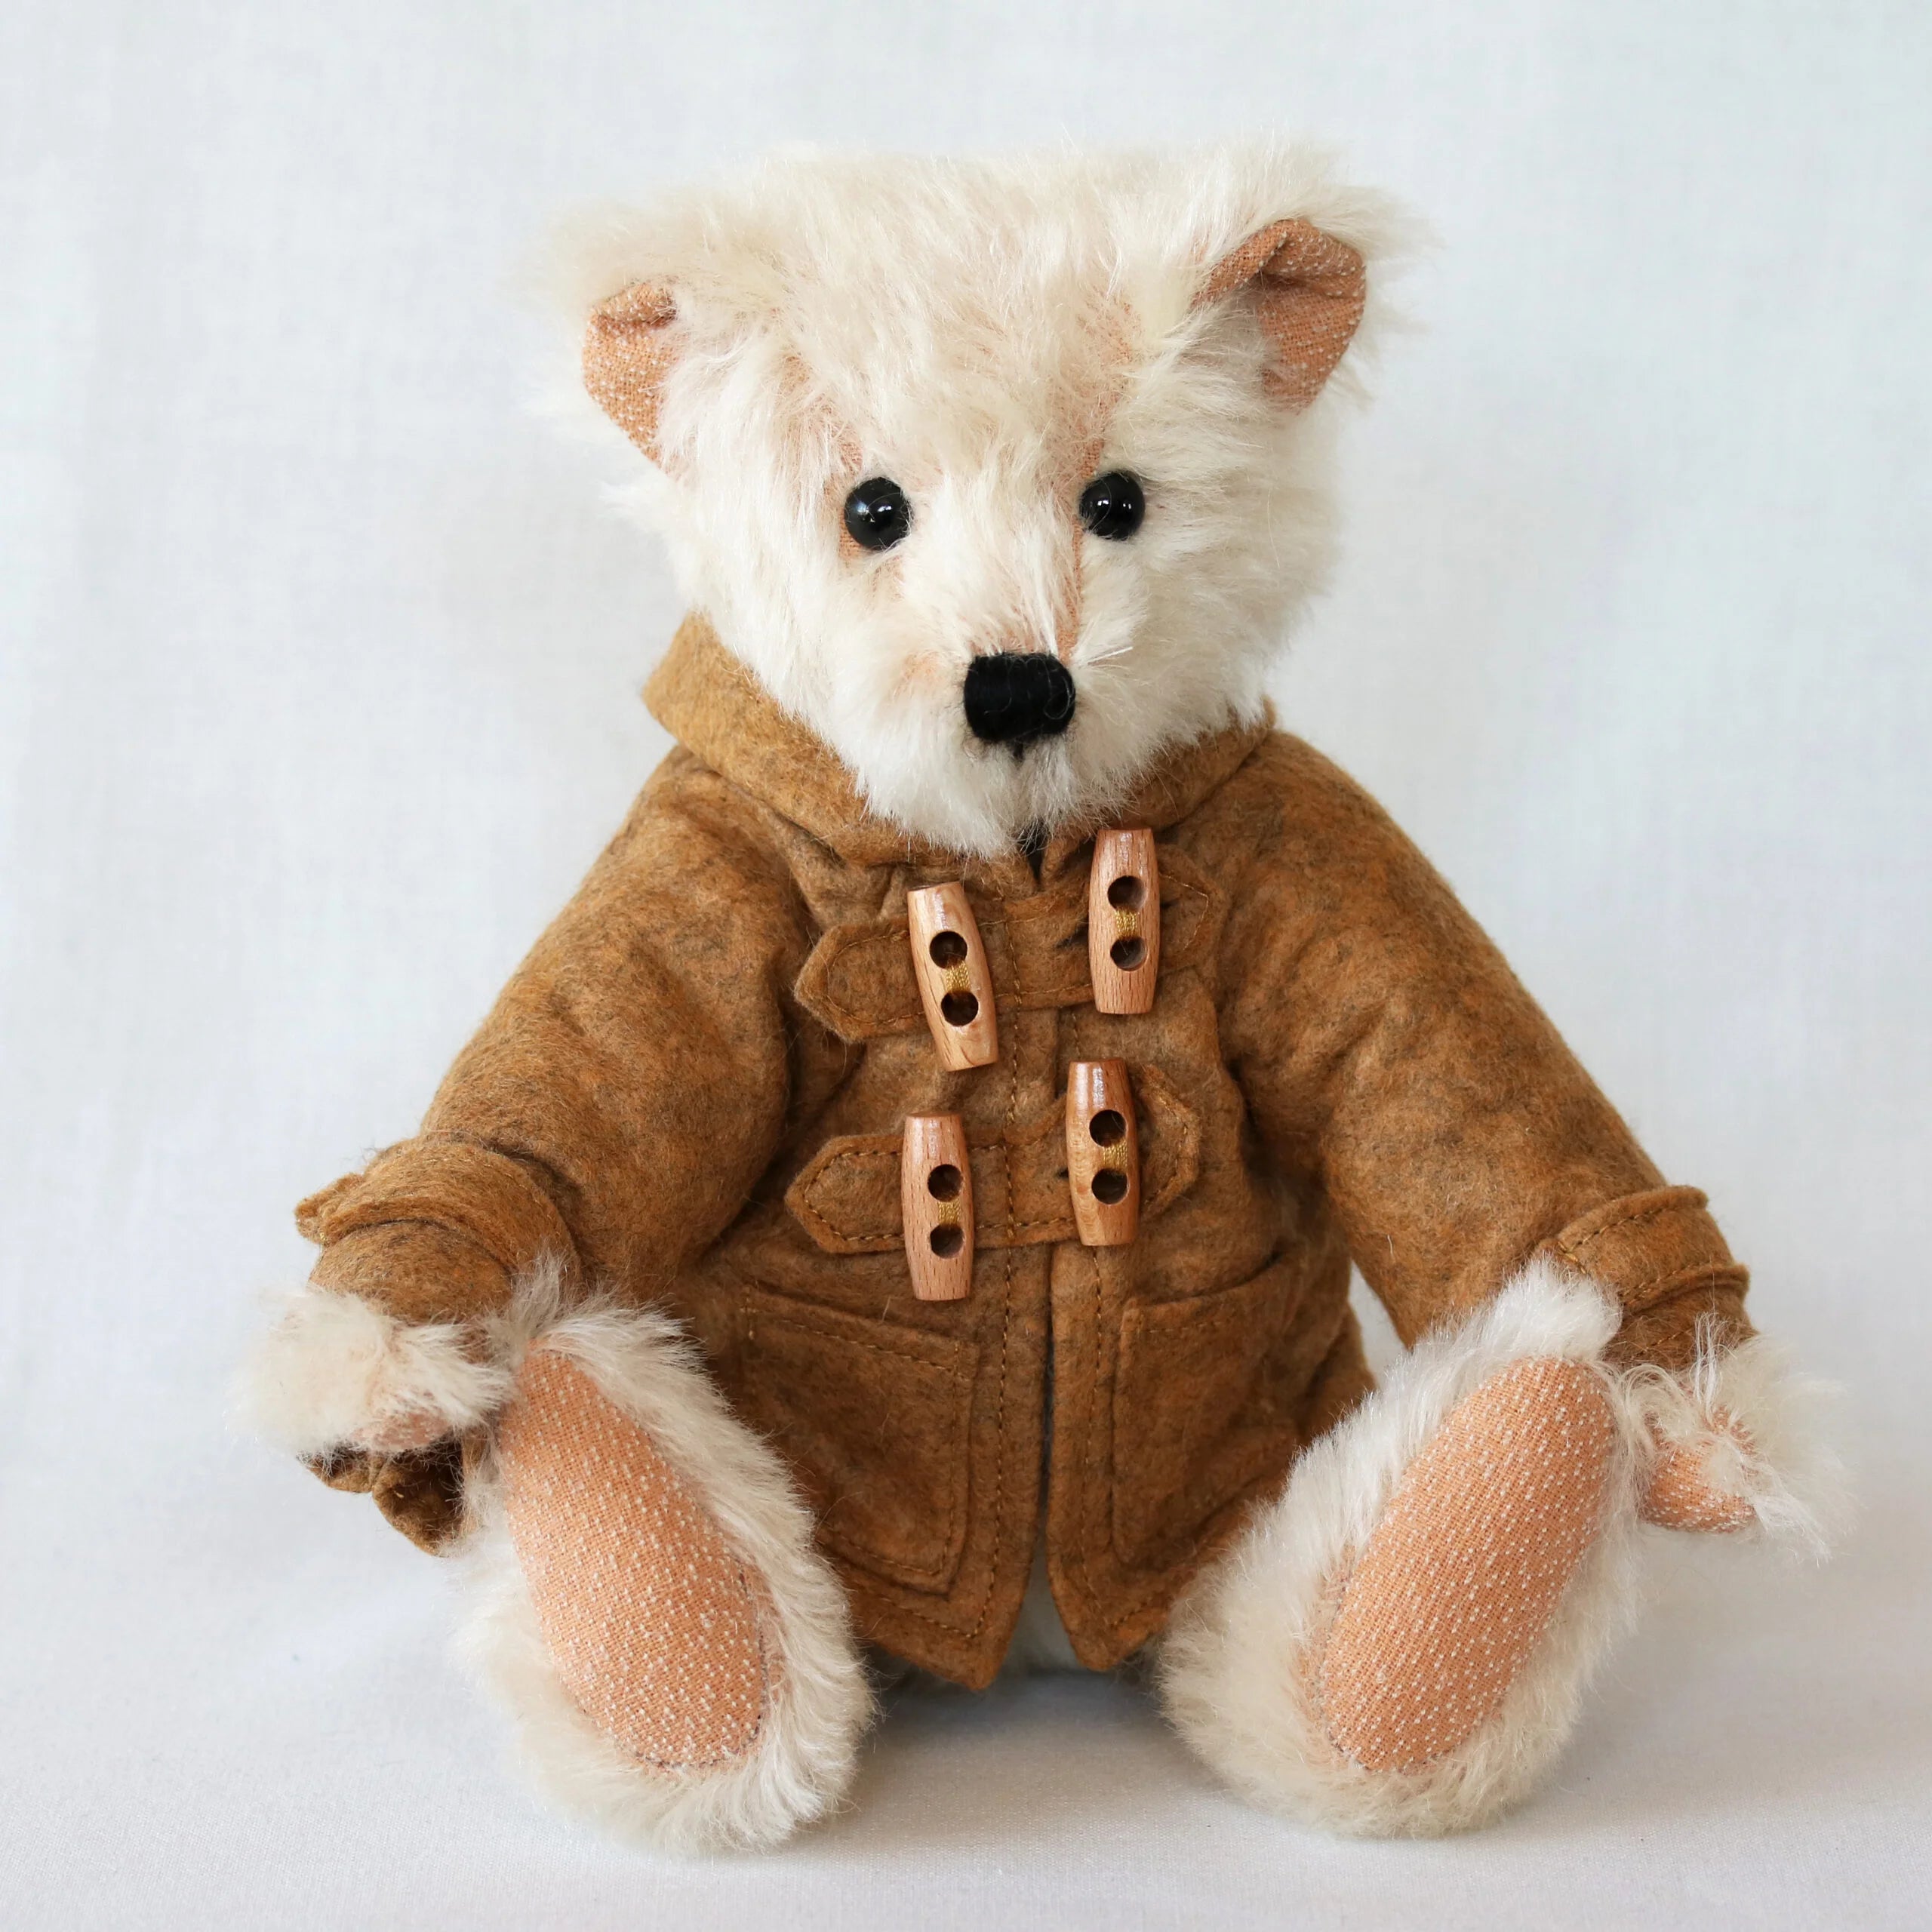 Wooster The Handmade Bear from Canterbury Bears.